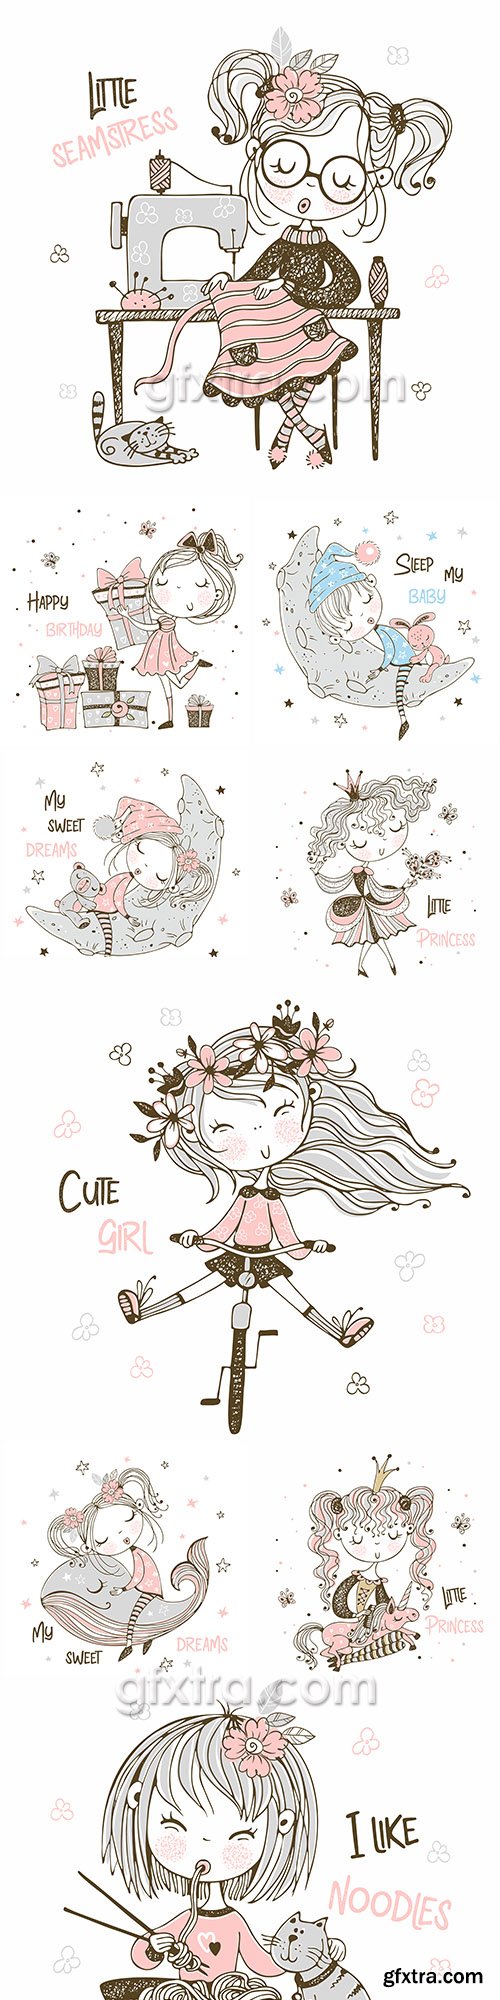 Little prince with gifts and crown drawing illustrations